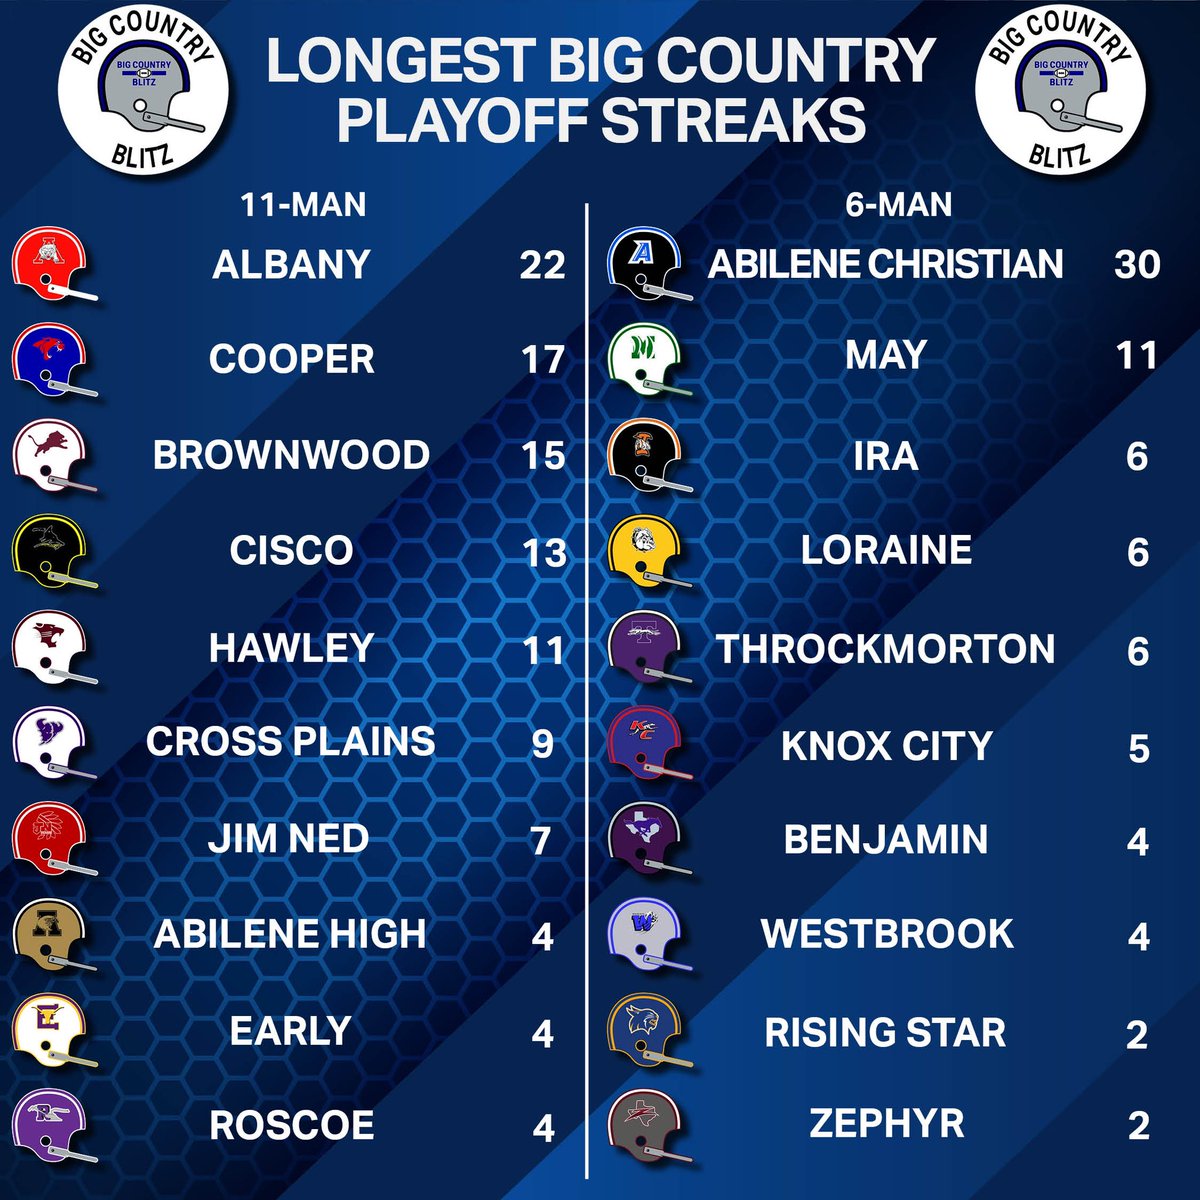 The Big Country leaderboard for most consecutive years reaching the postseason. Impressive work from Abilene Christian and Albany to lead the way. #txhsfb